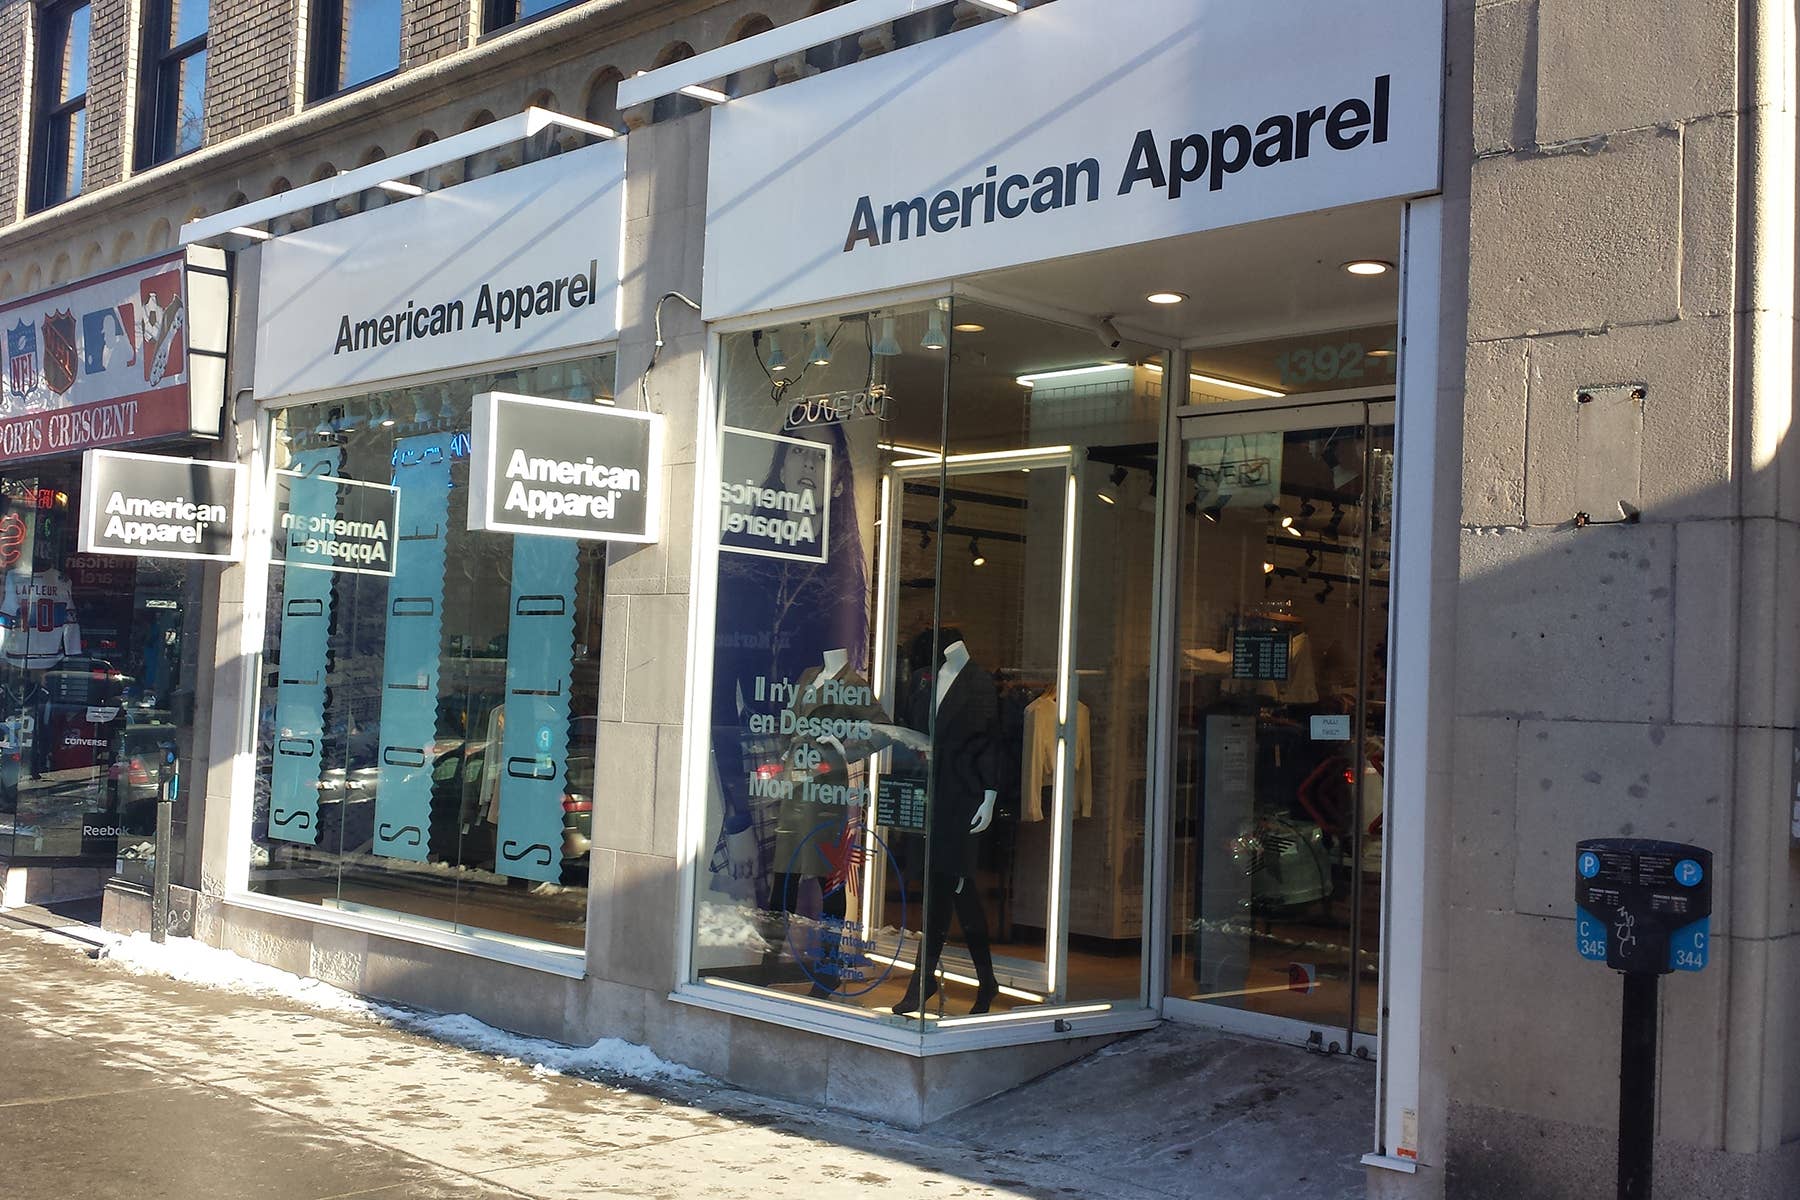 Montreal based Gildan Has Purchased American Apparel For $88M USD